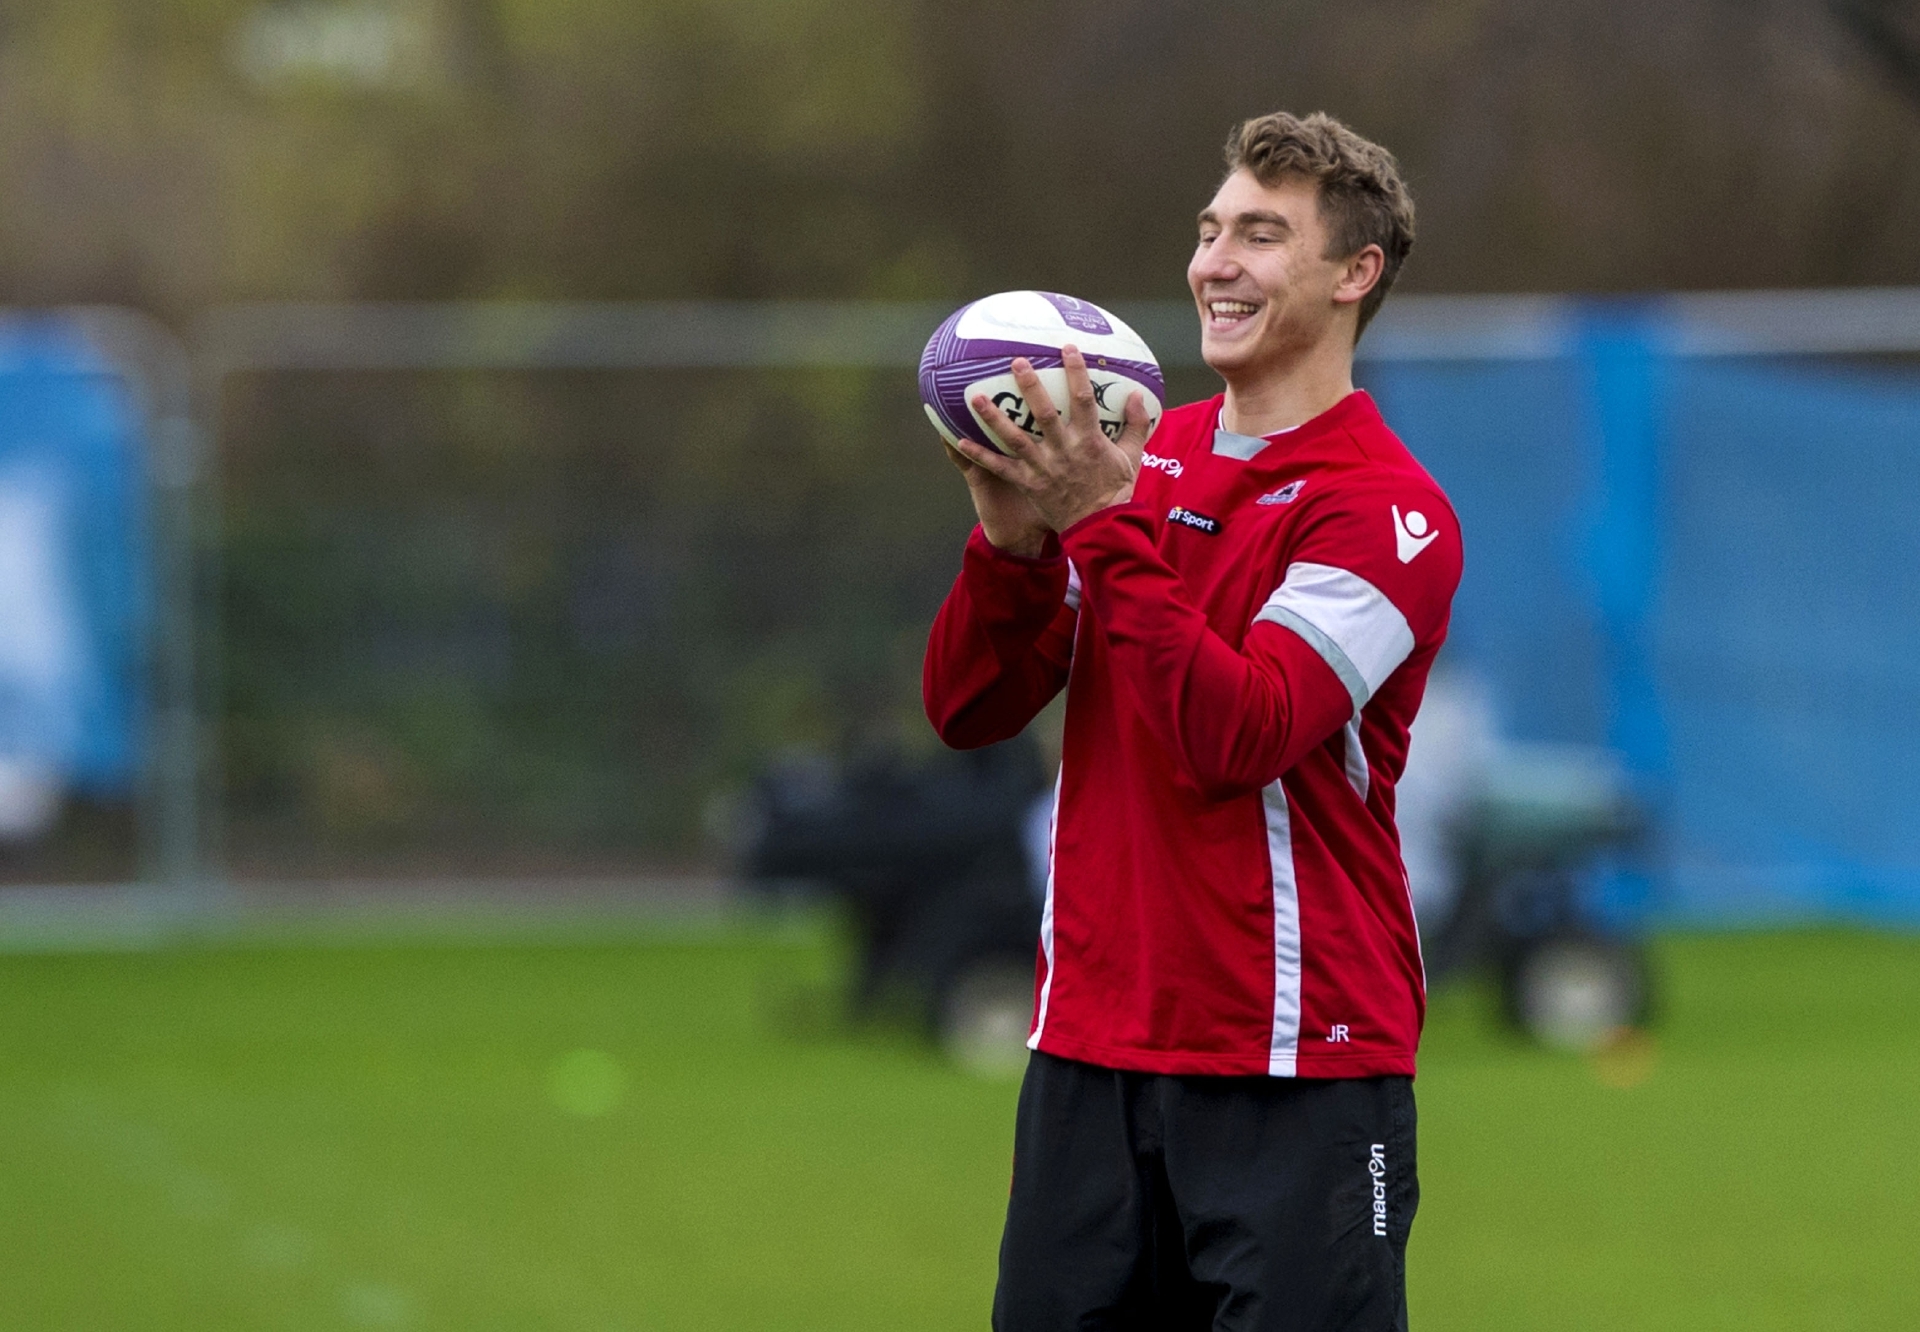 Jamie Ritchie is one of the key men retained for Scotland Under-20s clash with England.